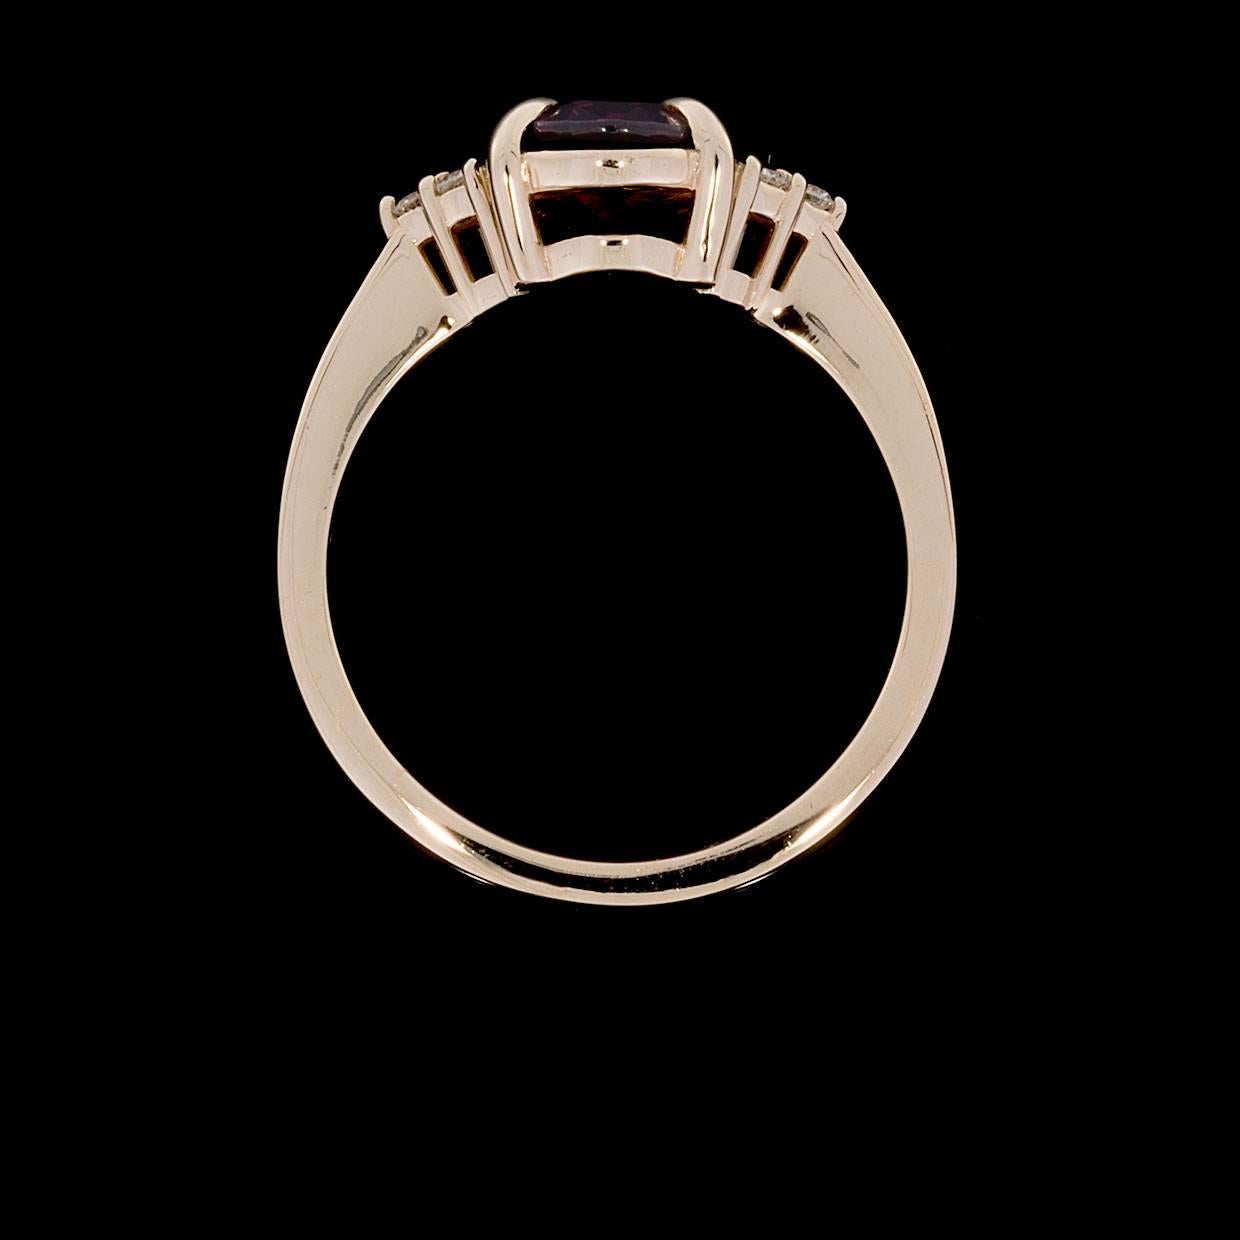 This lovely, fashion forward ring has a beautiful, timeless design that you'll love! The ring features an oval brilliant cut, natural, raspberry rhodolite garnet center that measures 9x7 millimeters in size & weighs approximately 2.25 carats. This